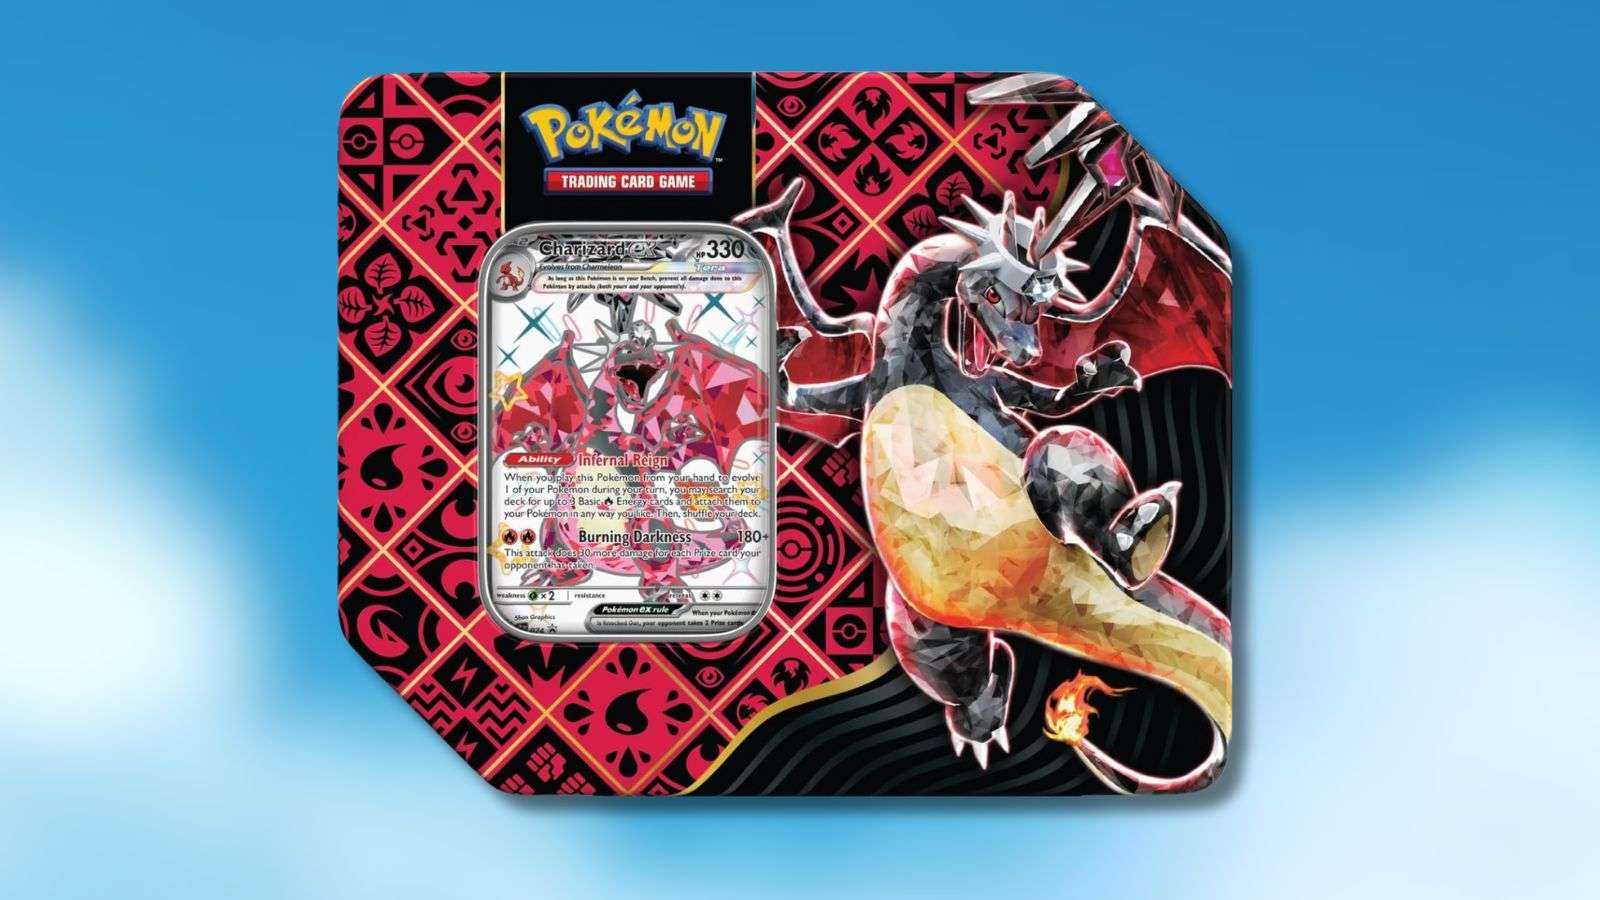 Receive Play! Pokémon Prize Packs Series Four at Your Local Game